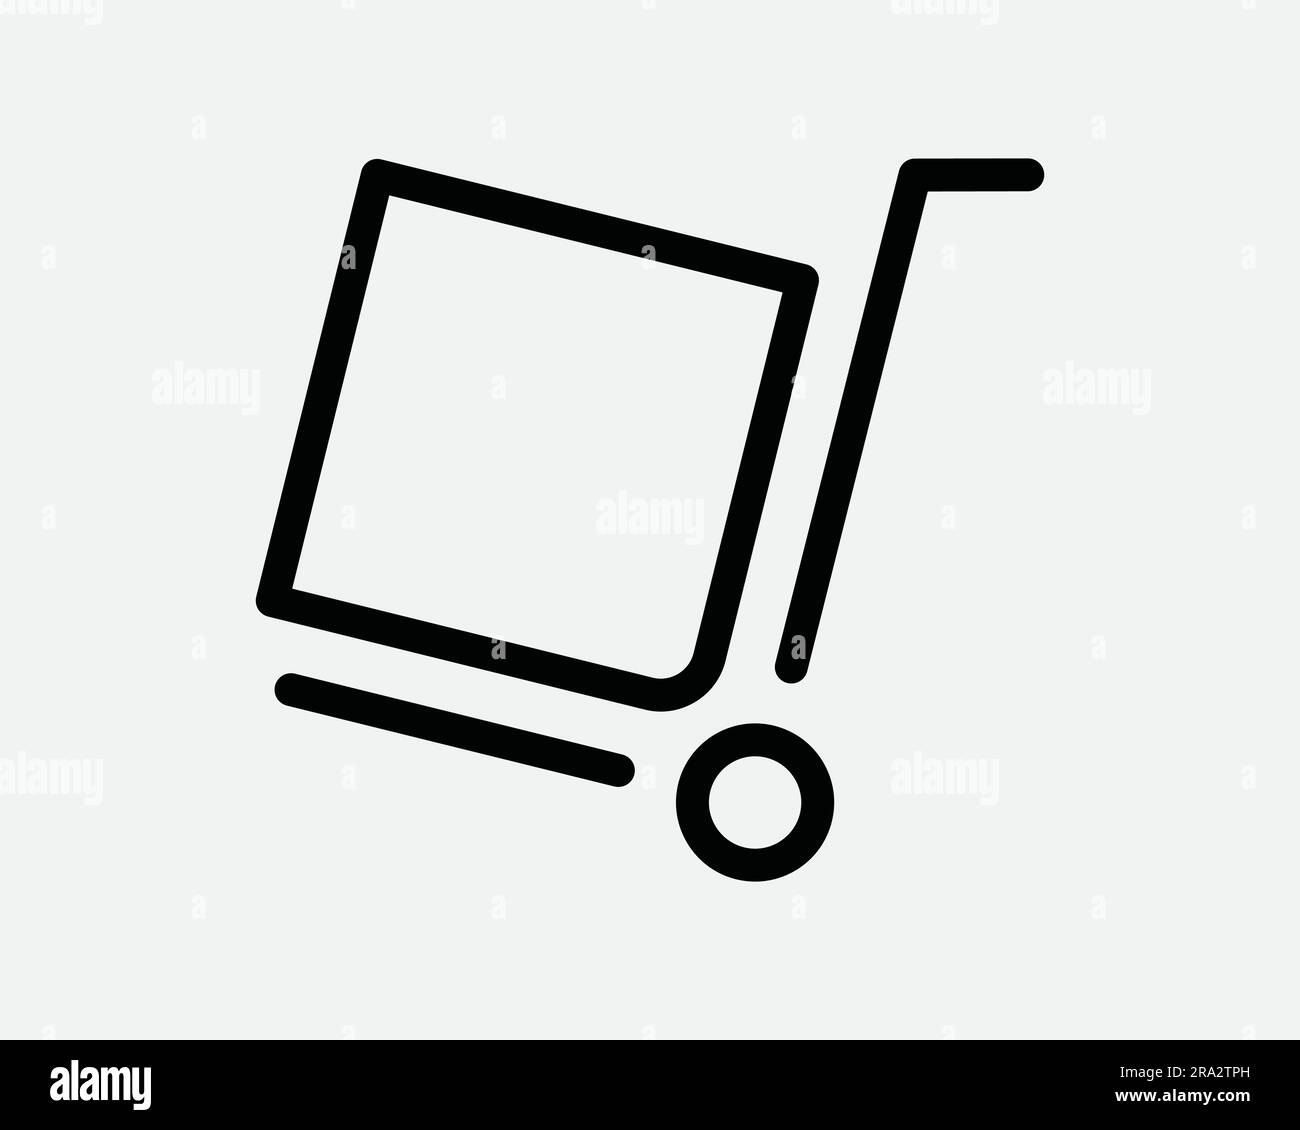 Hand Trolley Icon. Delivery Package Box Warehouse Transport Truck Cargo Order Parcel Load. Black White Graphic Clipart Artwork Symbol Sign Vector EPS Stock Vector